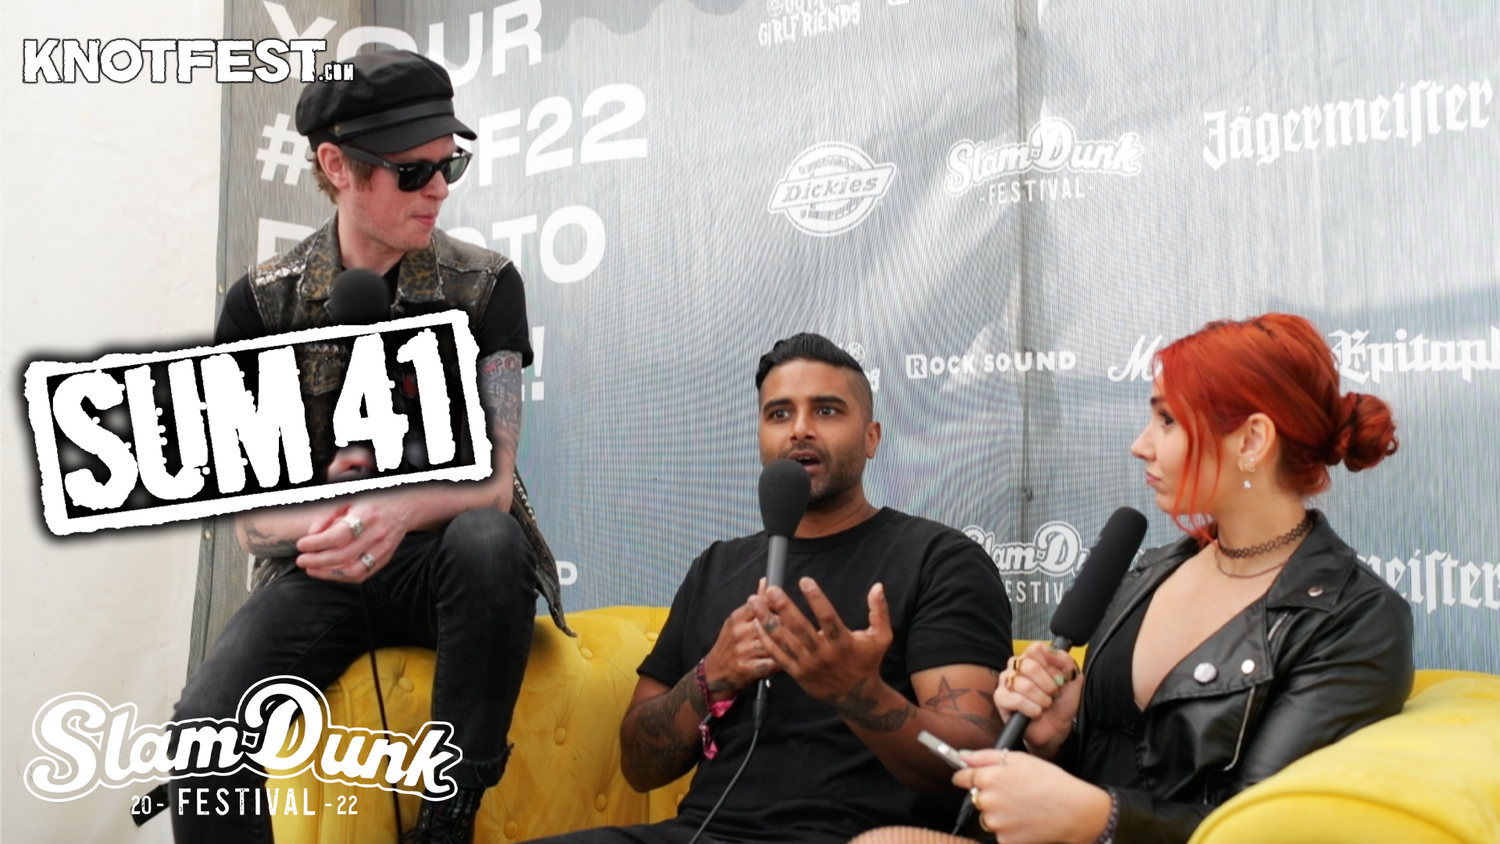 Sum 41: Continued Legacy, Early 2000s Chaos, "Pain for Pleasure" & More